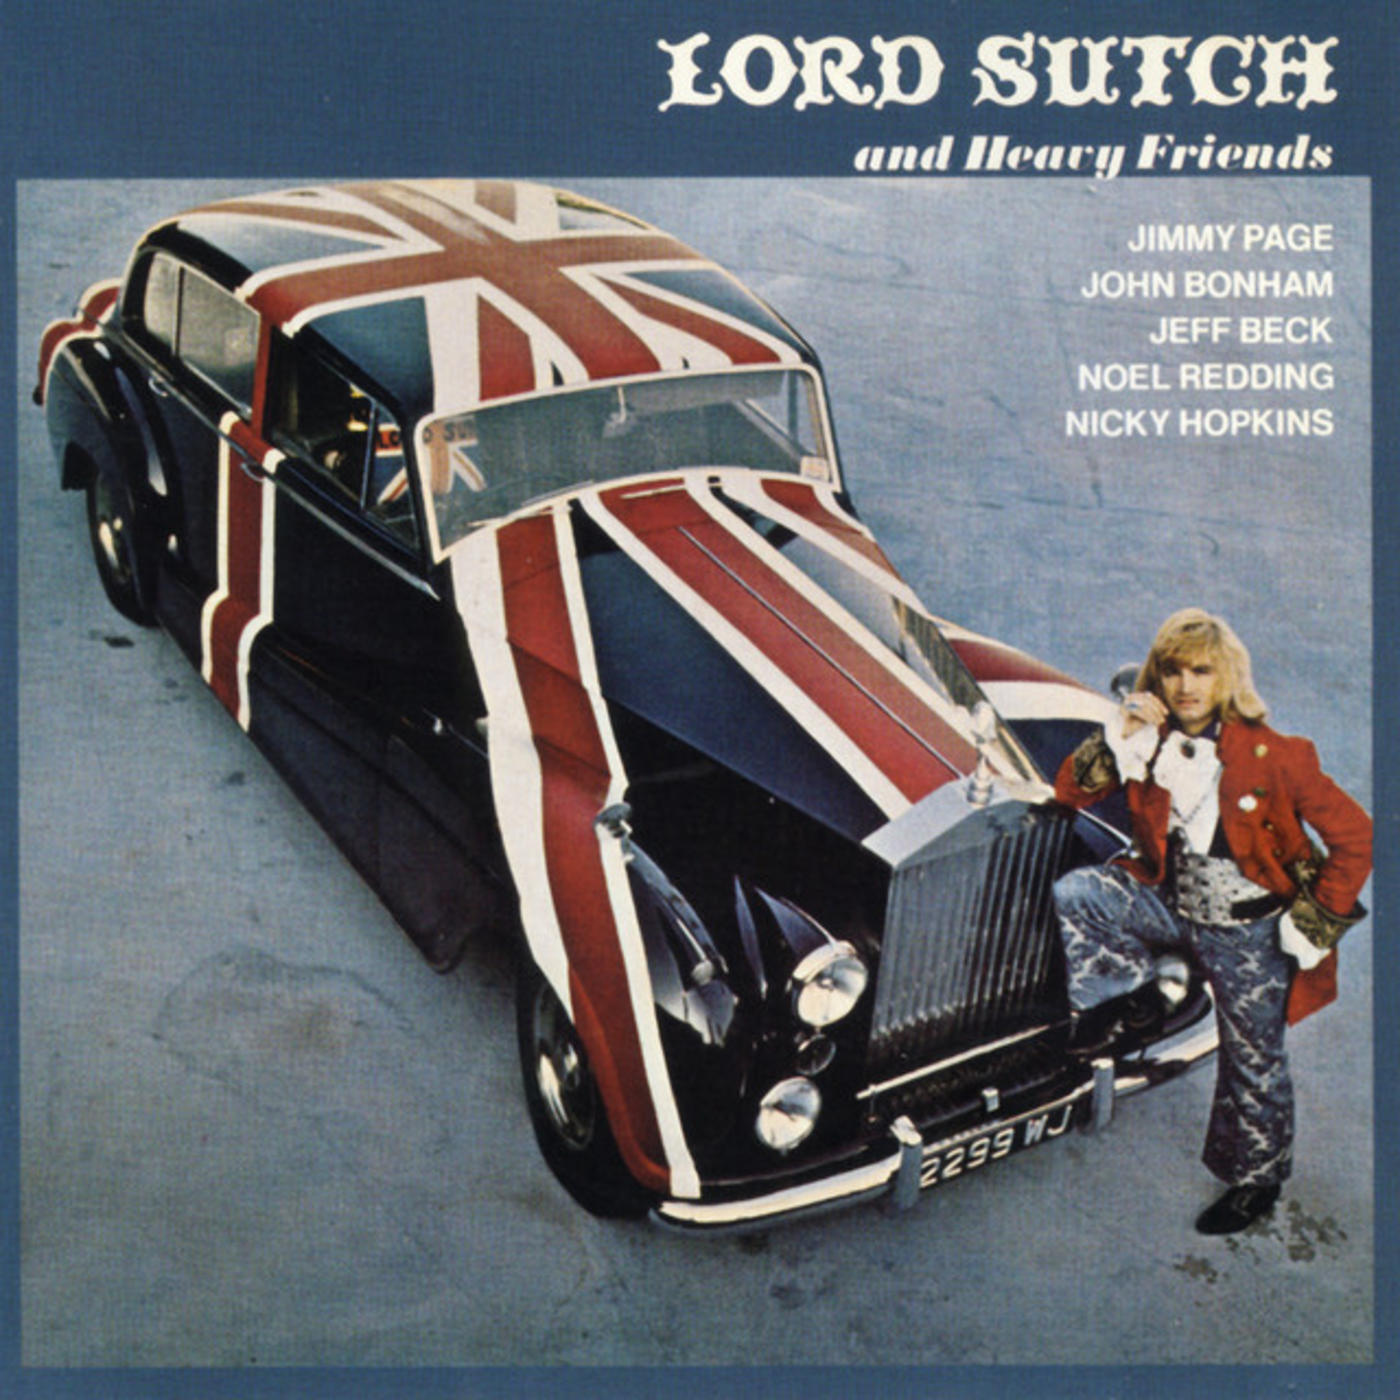 Lord Sutch and Heavy Friends